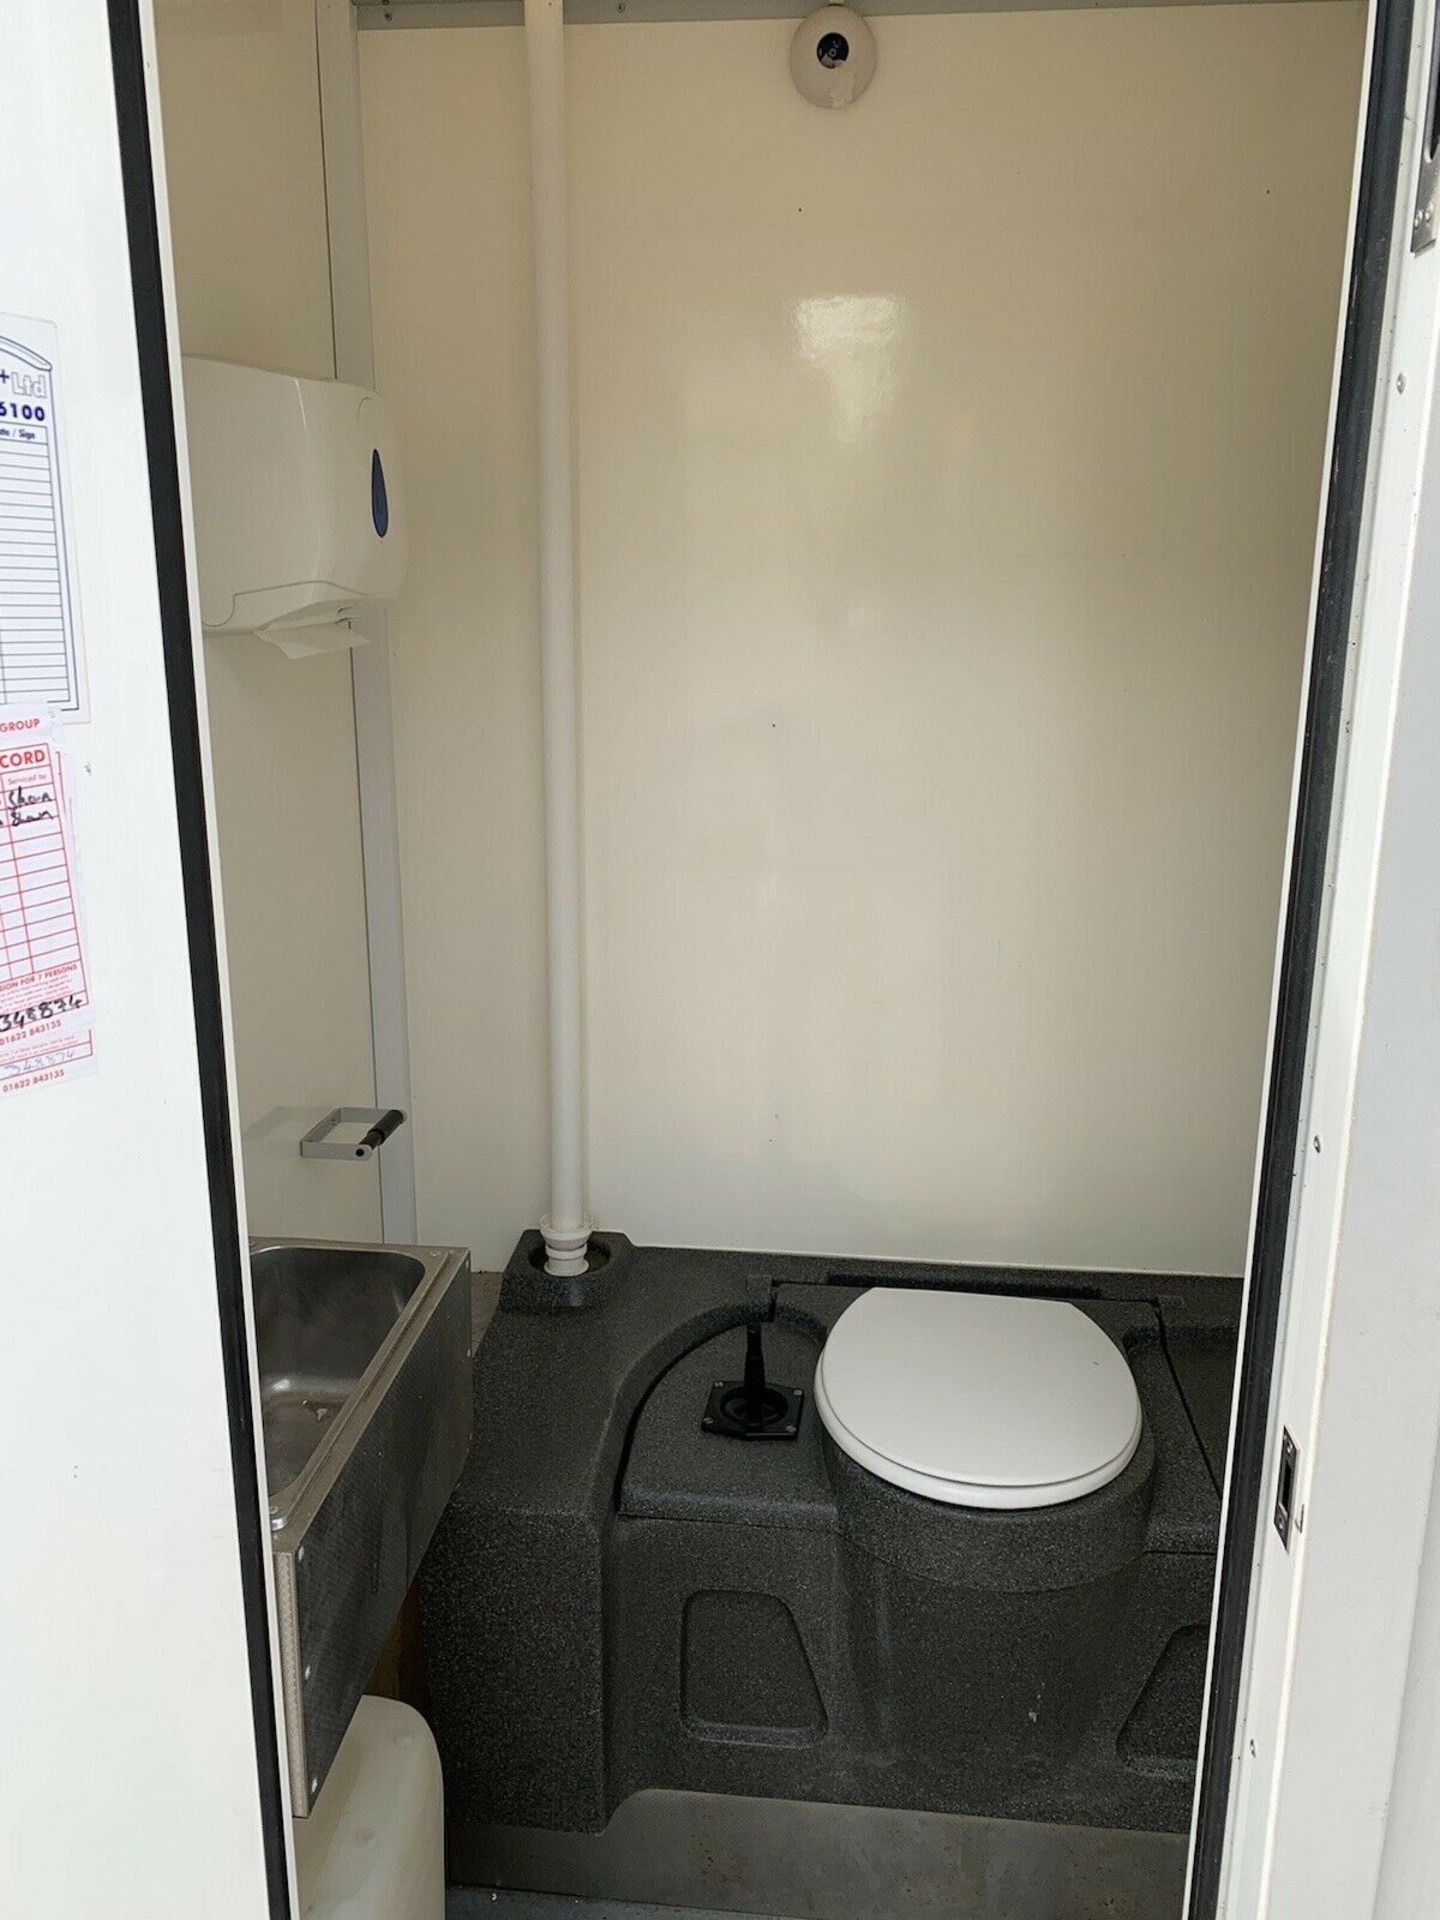 AJC Towable Welfare Unit Site Office Cabin Canteen Toilet Generator Groundhog - Image 7 of 9